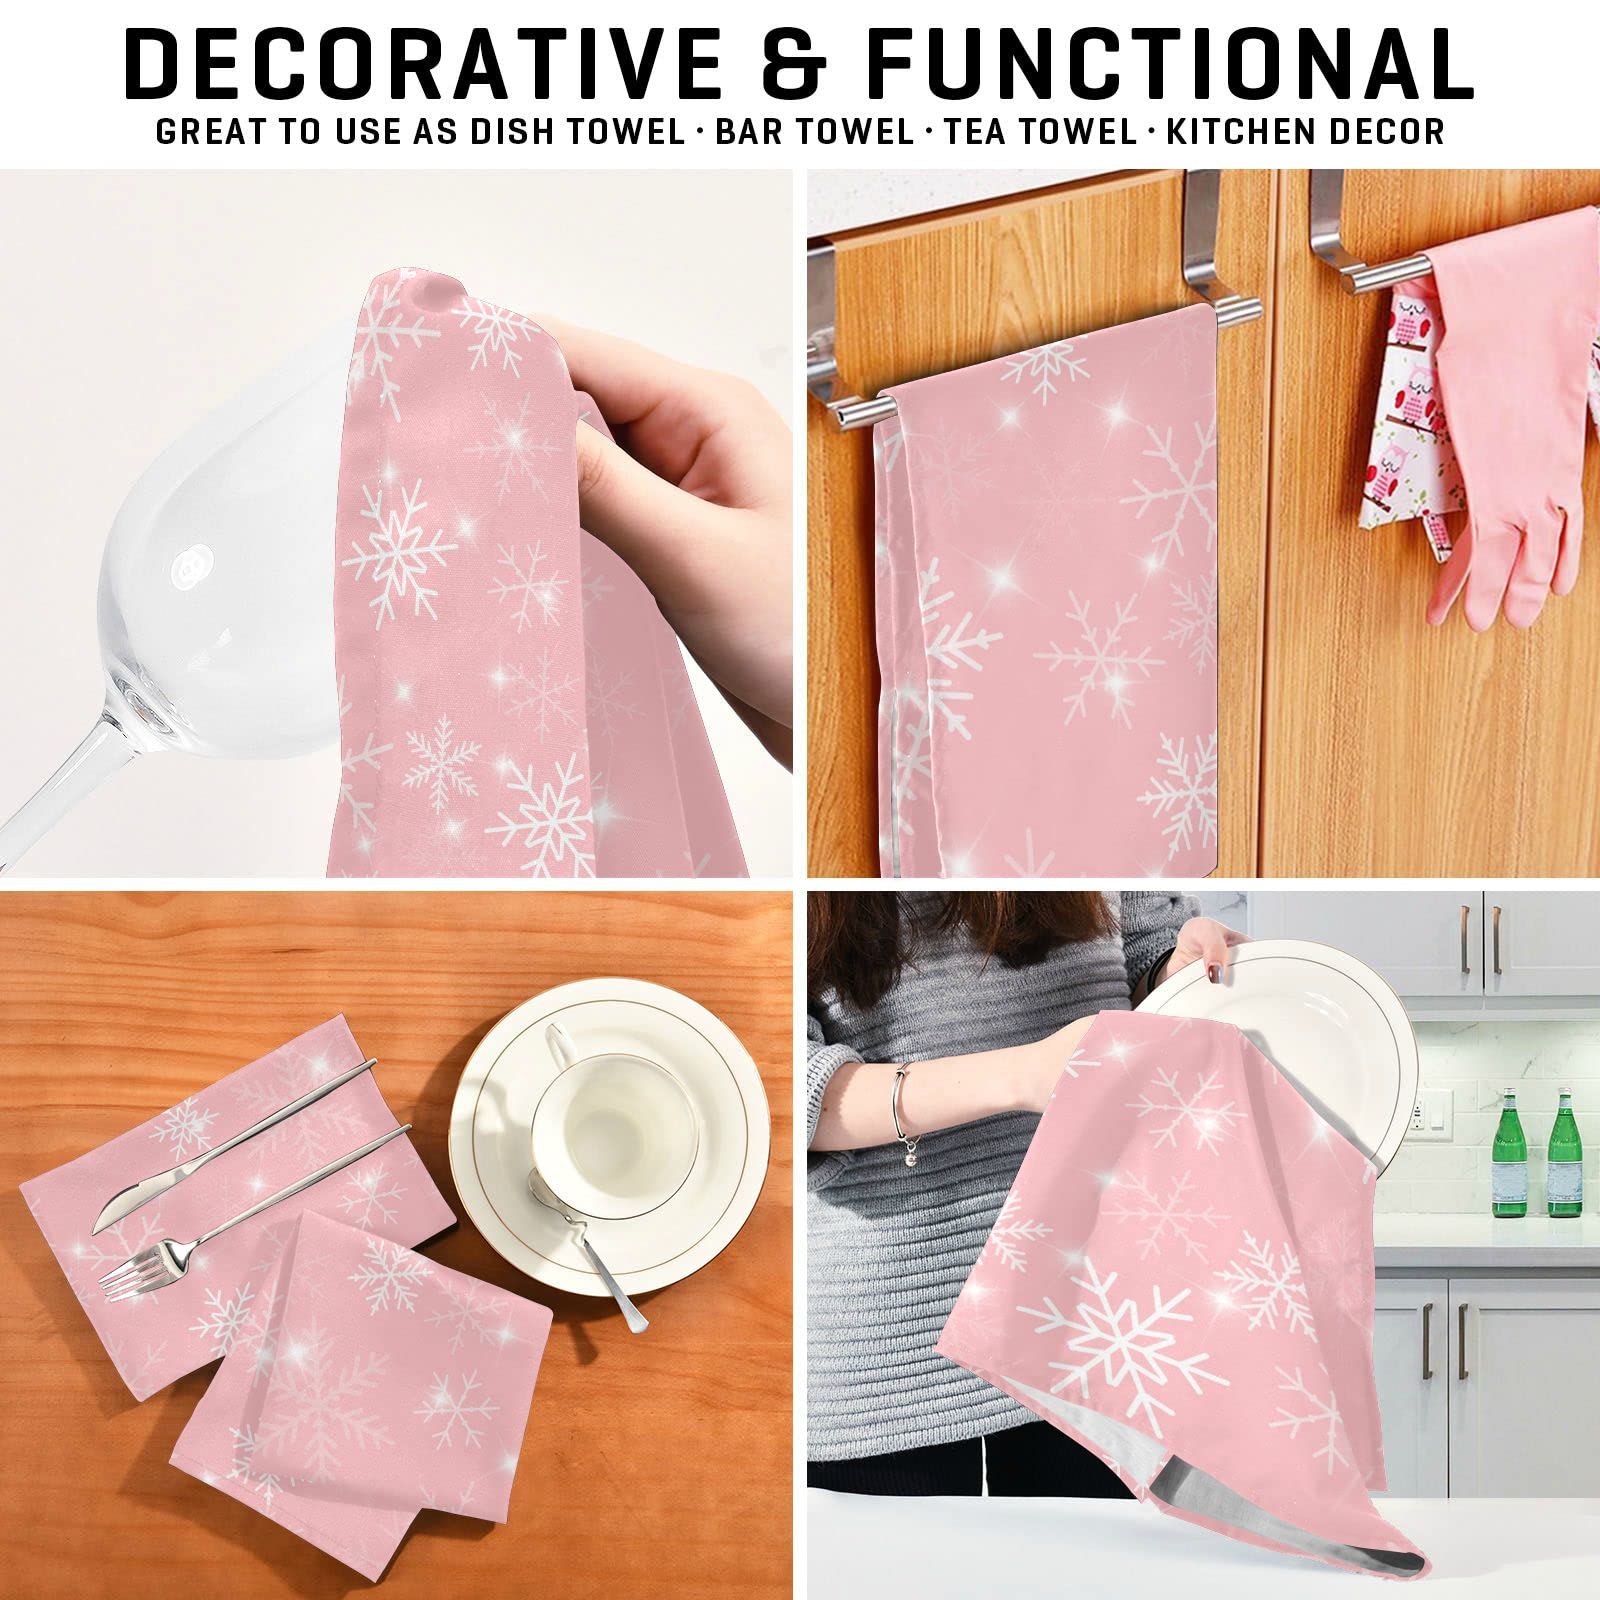 Exnundod Pink Kitchen Dish Towels Christmas Snowflakes Set of 4, Kitchen Towels Winter Themed Dish Cloth Reusable Cleaning Dishcloth Drying Wiping Decorative 18x28inch